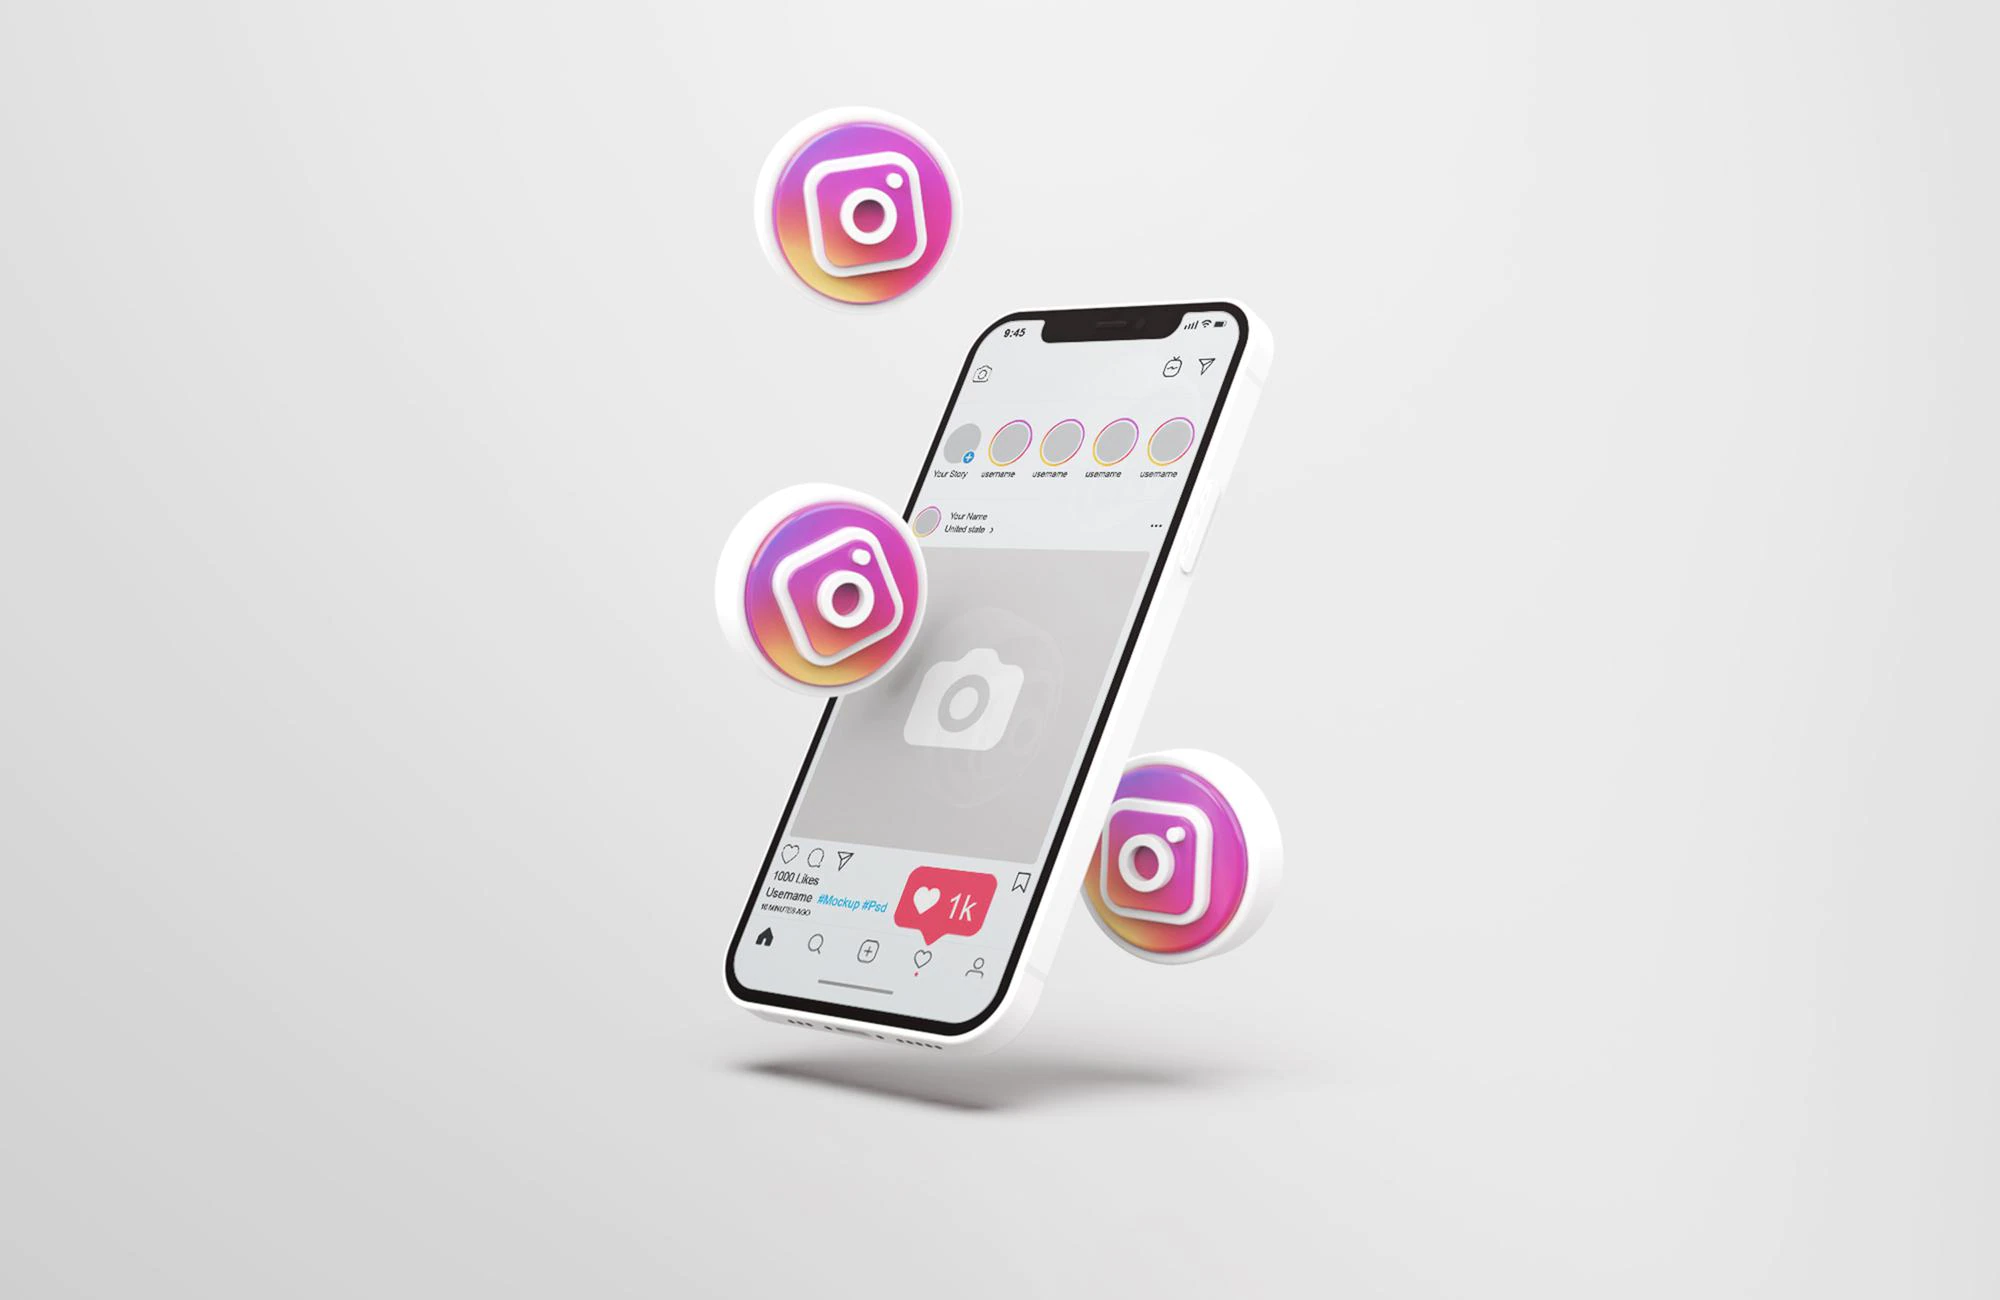 instagram white mobile phone mockup with 3d icons 106244 1786